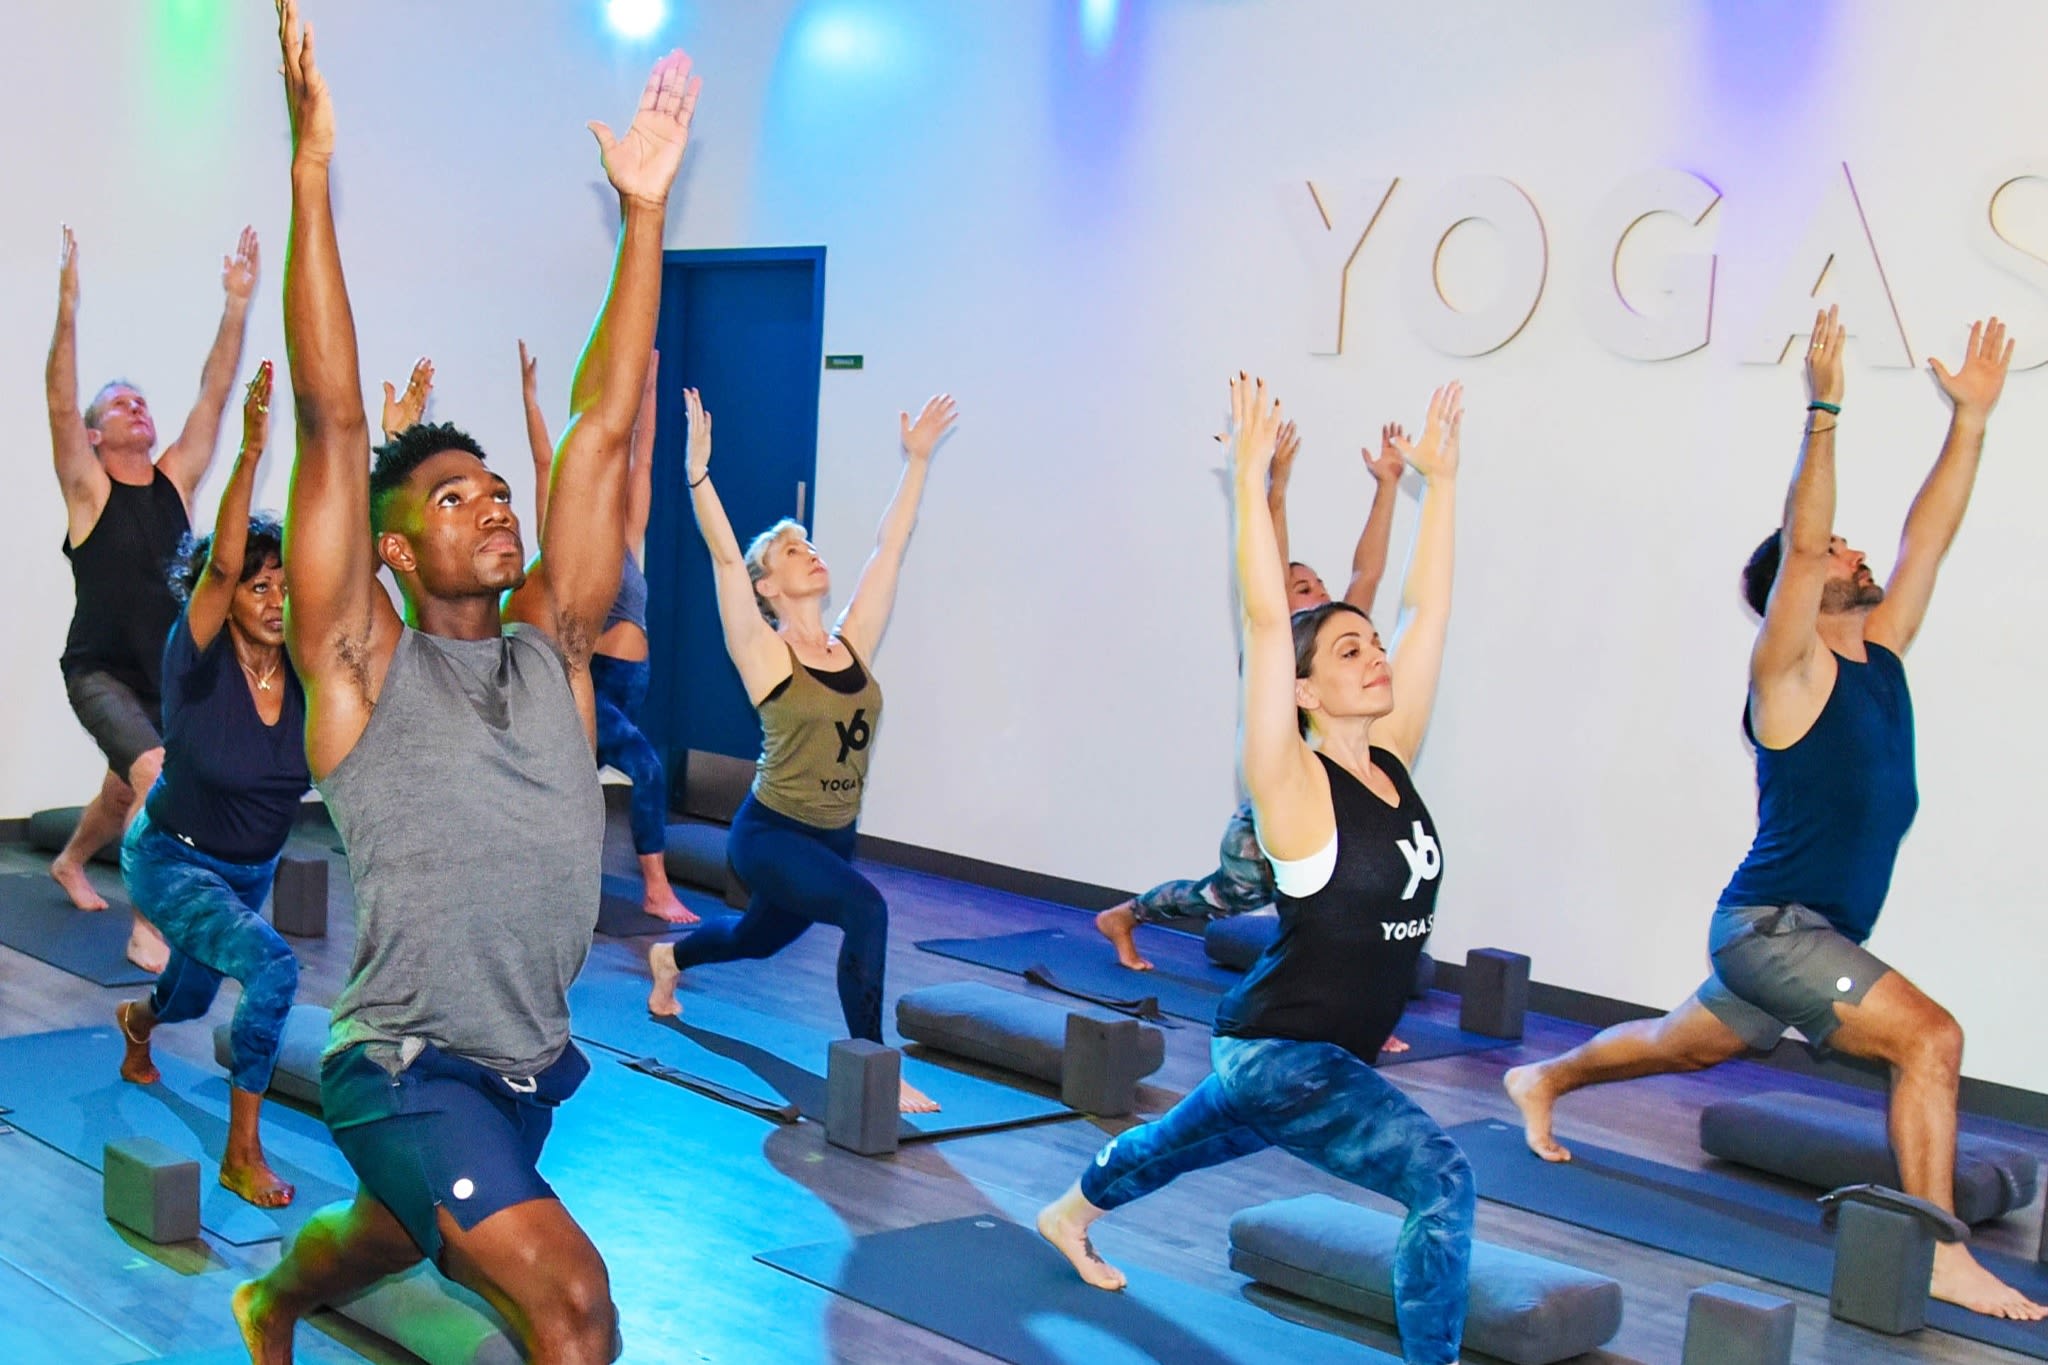 Yogasix Las Colinas Read Reviews And